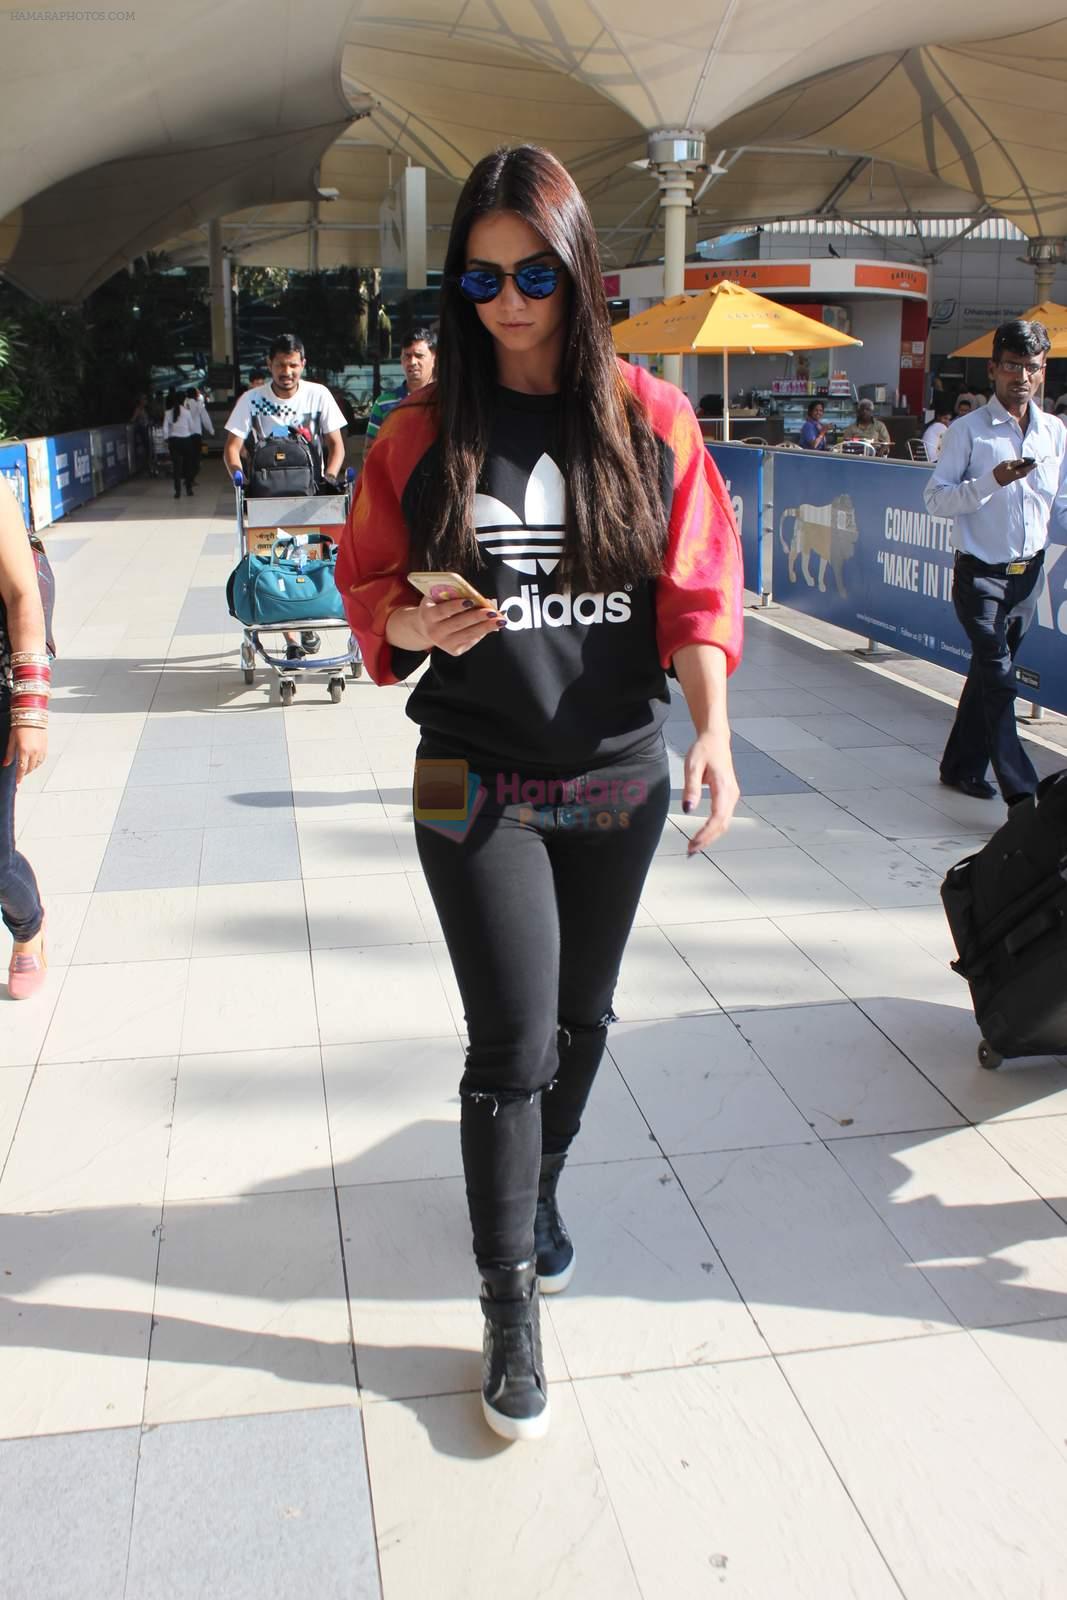 Lauren Gottlieb snapped at airport on 12th Dec 2015